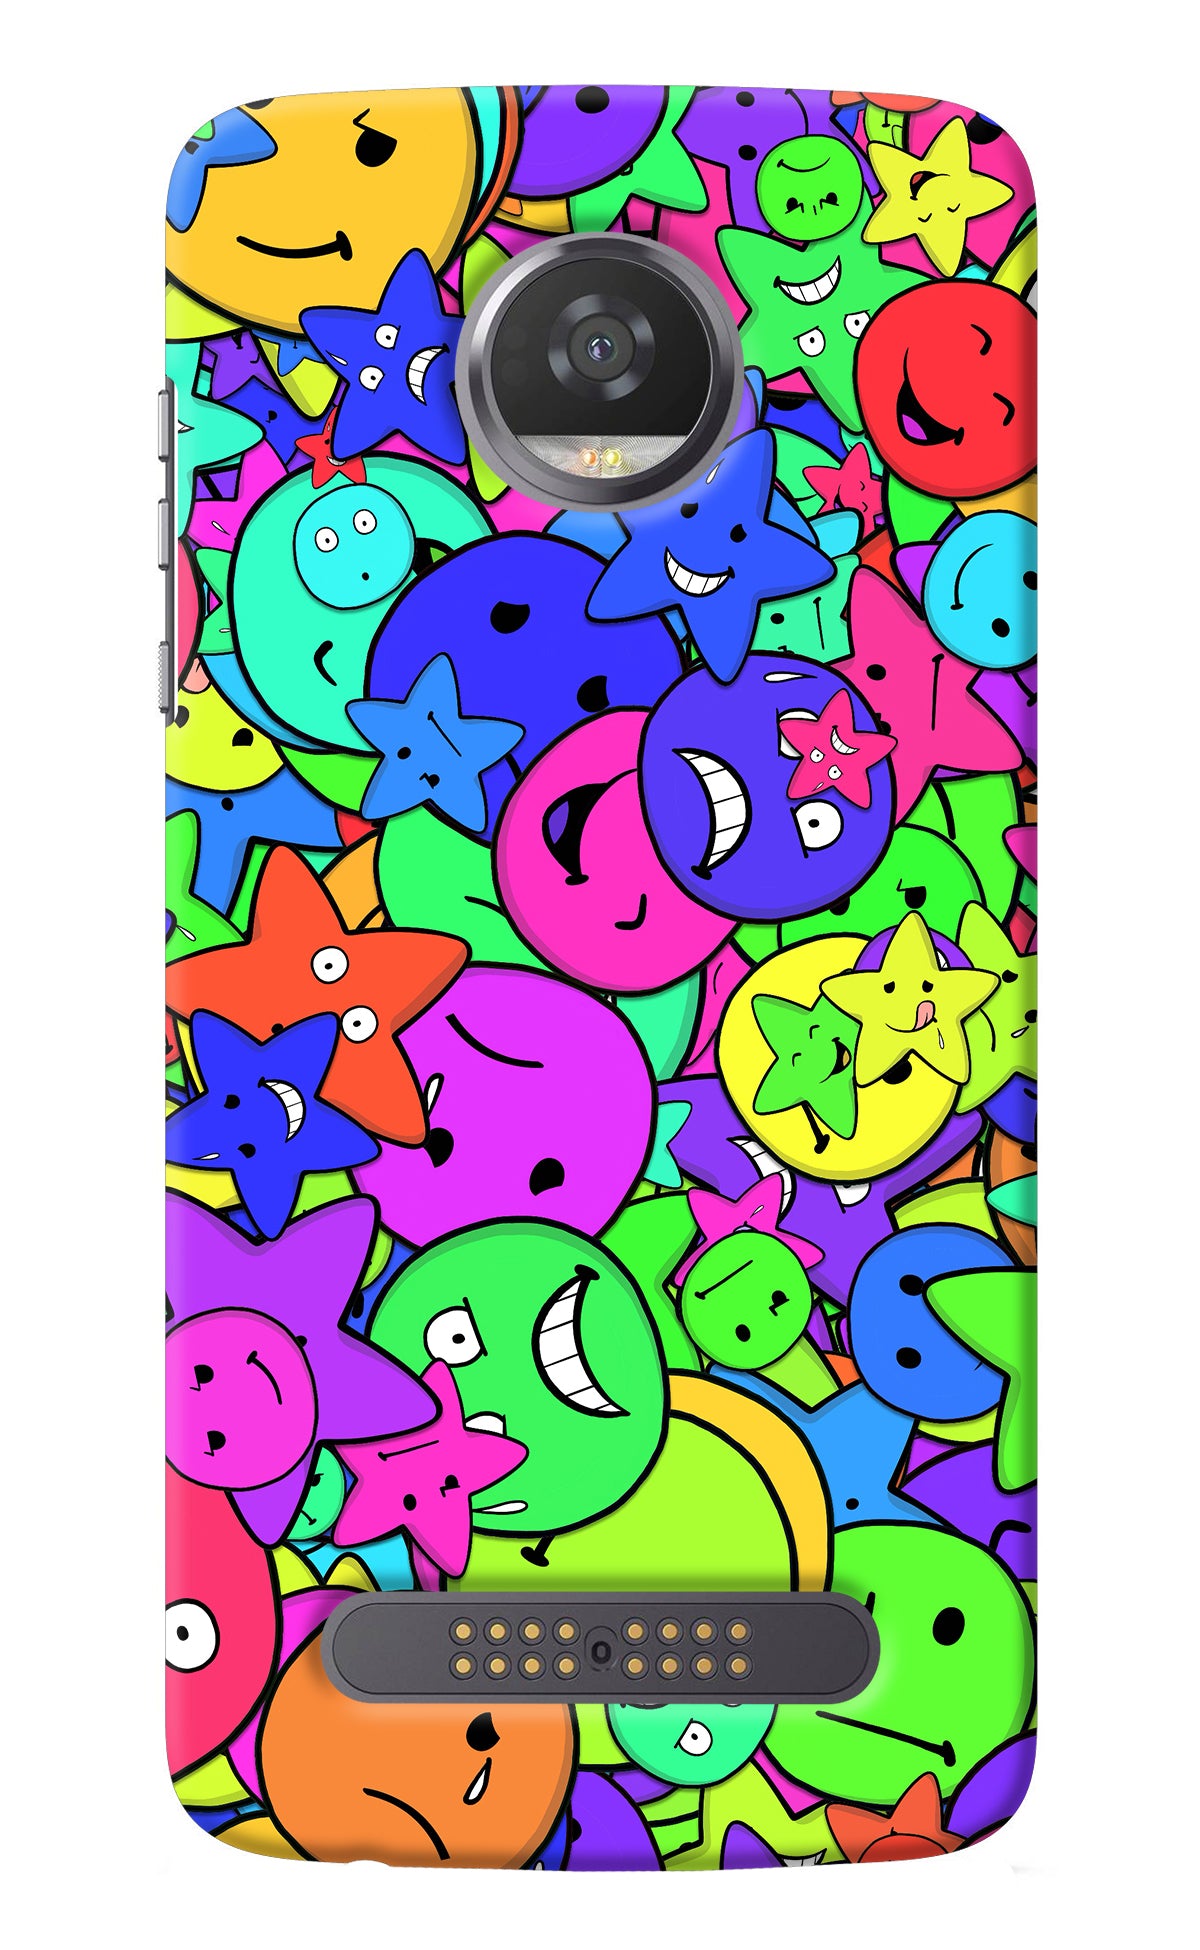 Fun Doodle Moto Z2 Play Back Cover